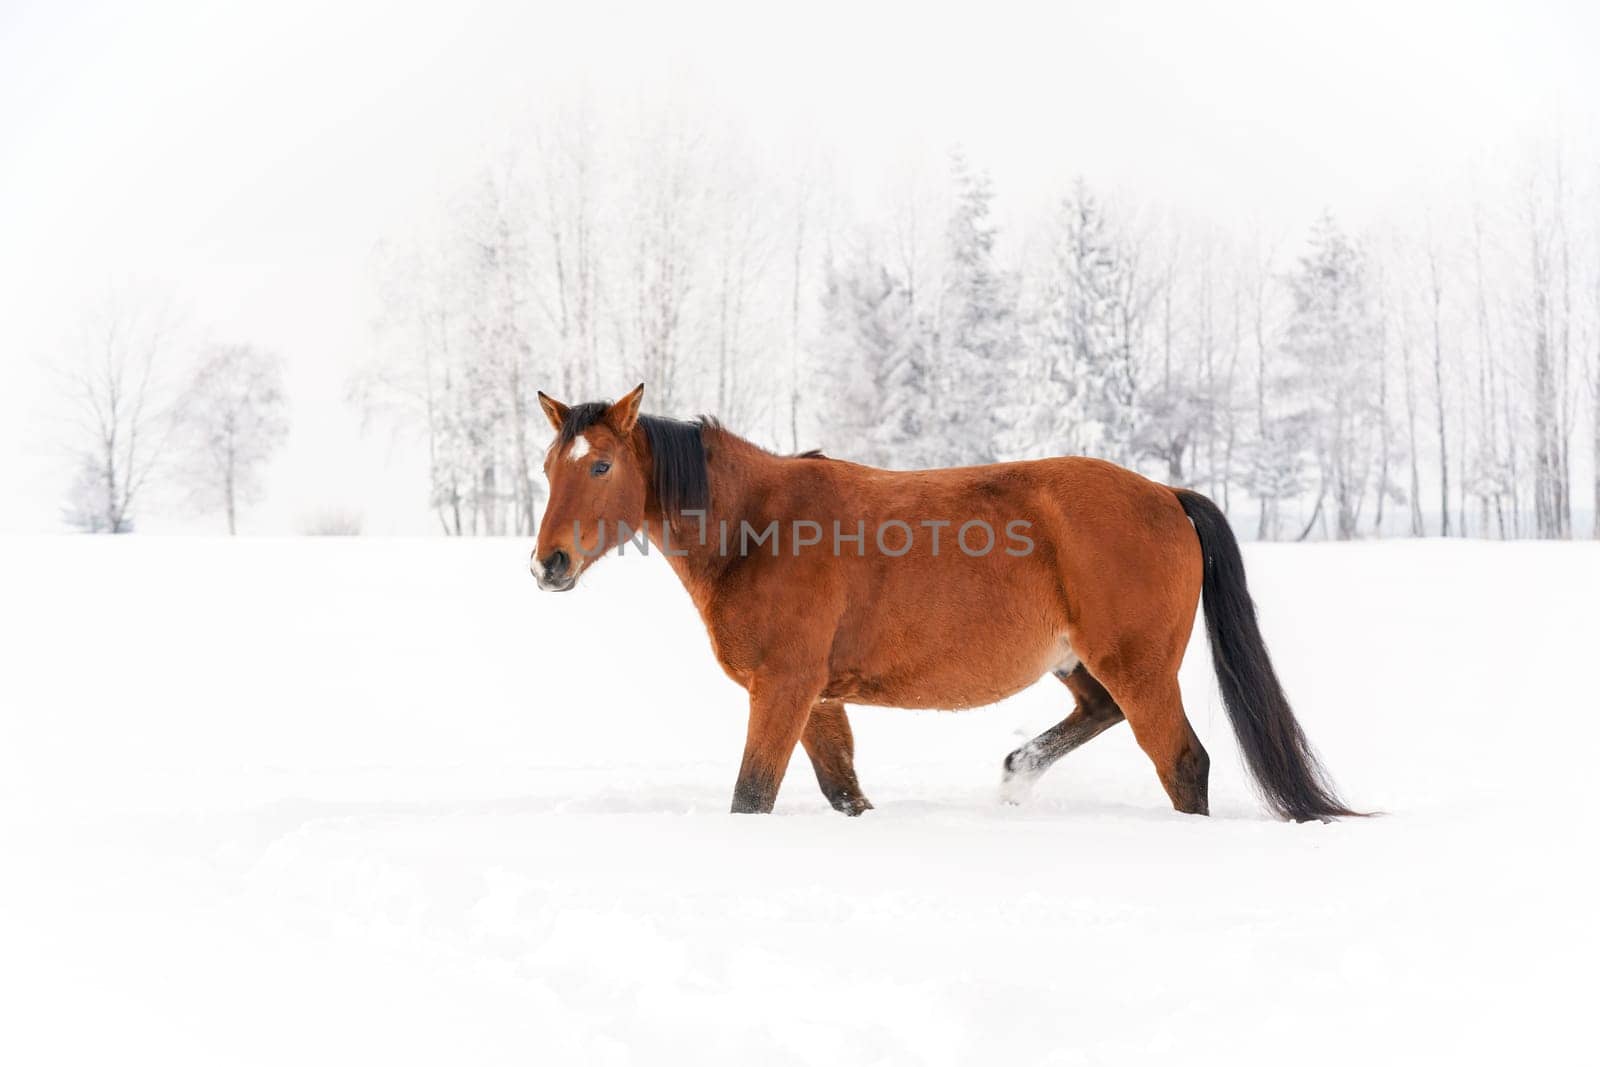 Brown horse on snow covered field, overcast morning, blurred trees in background.